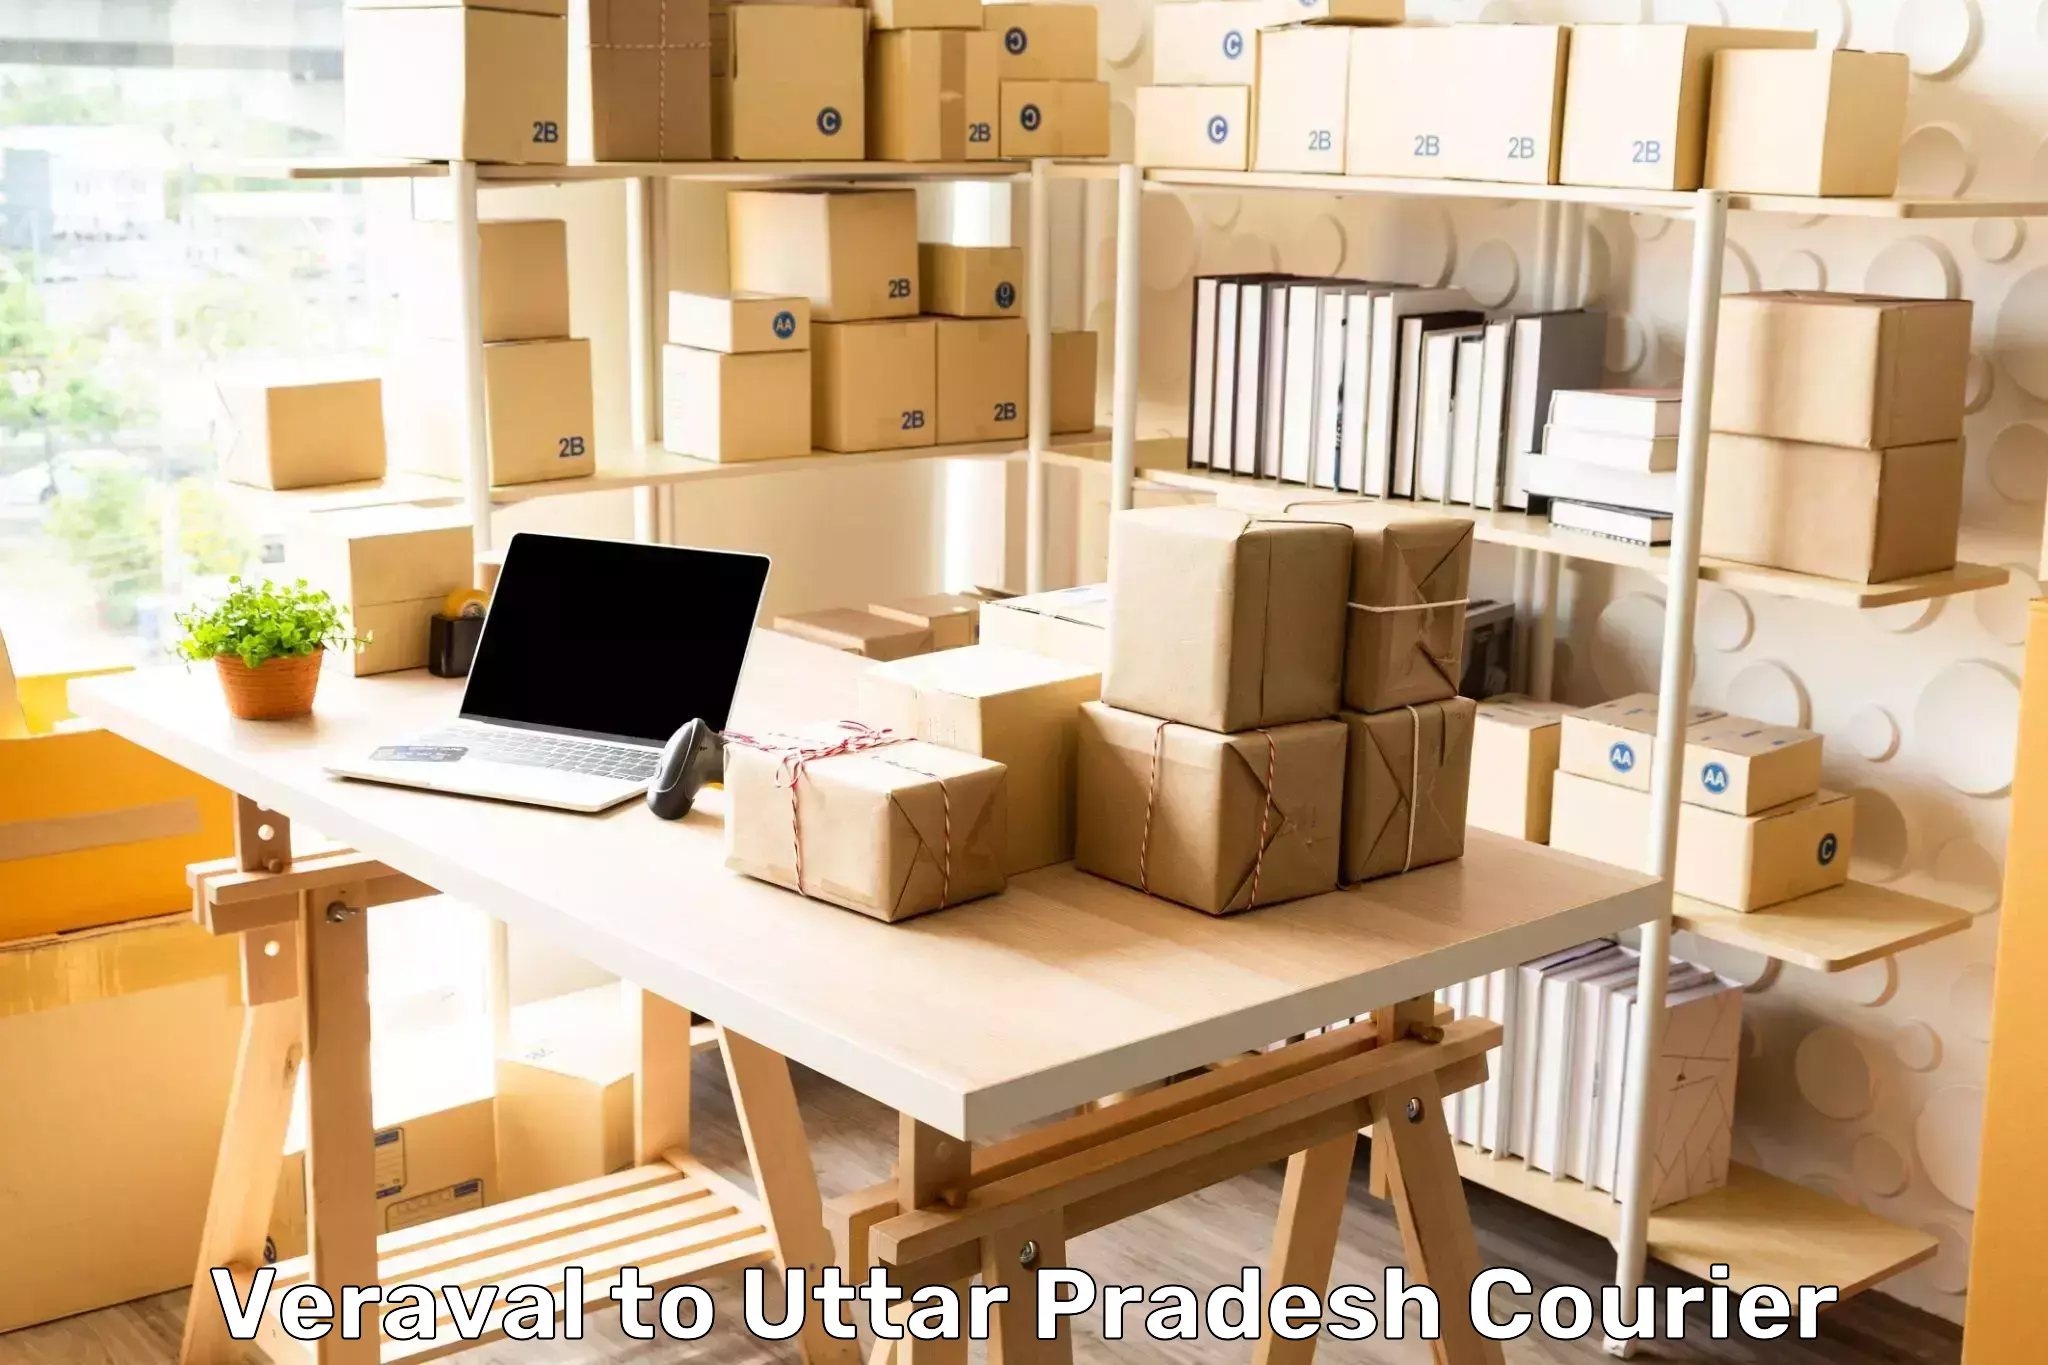 Sustainable courier practices Veraval to Ayodhya